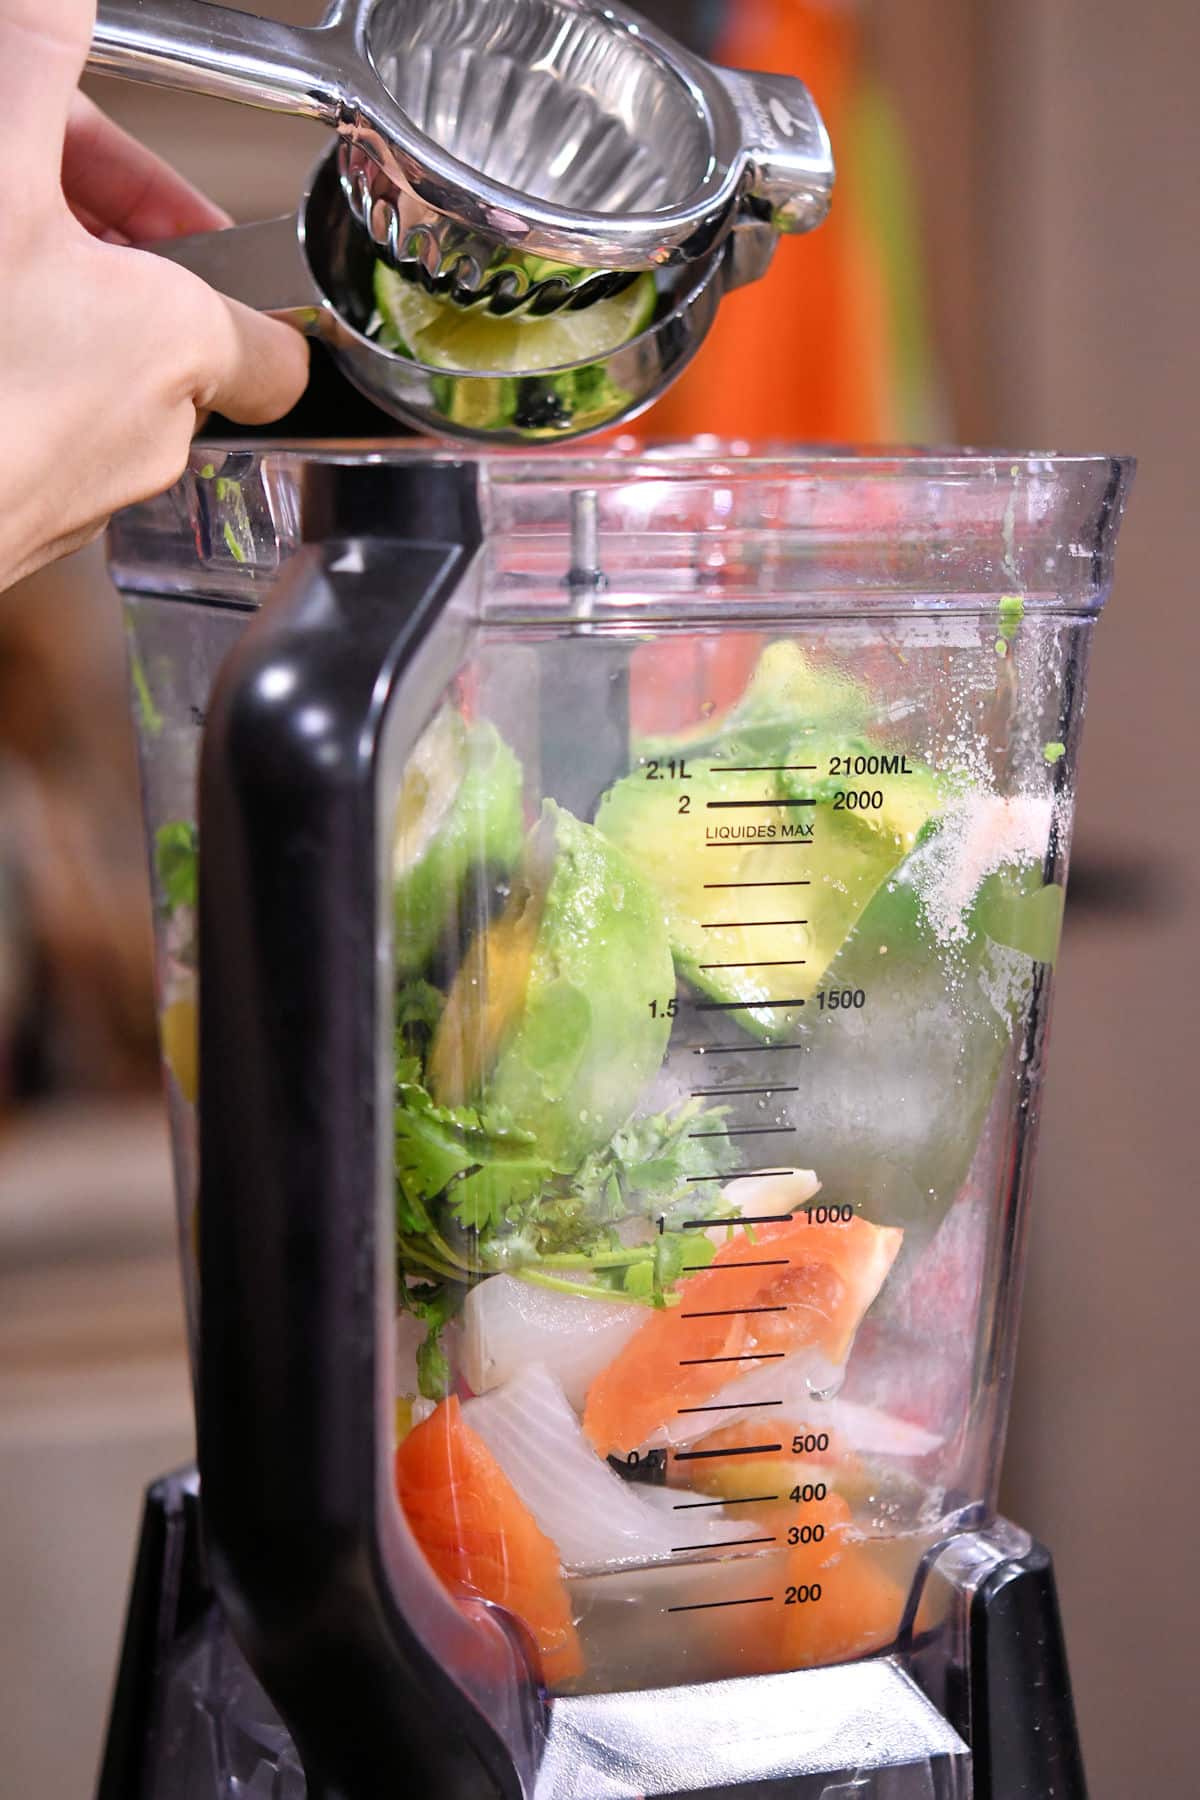 squeezing lime into a blender of avocado and other fresh vegetables